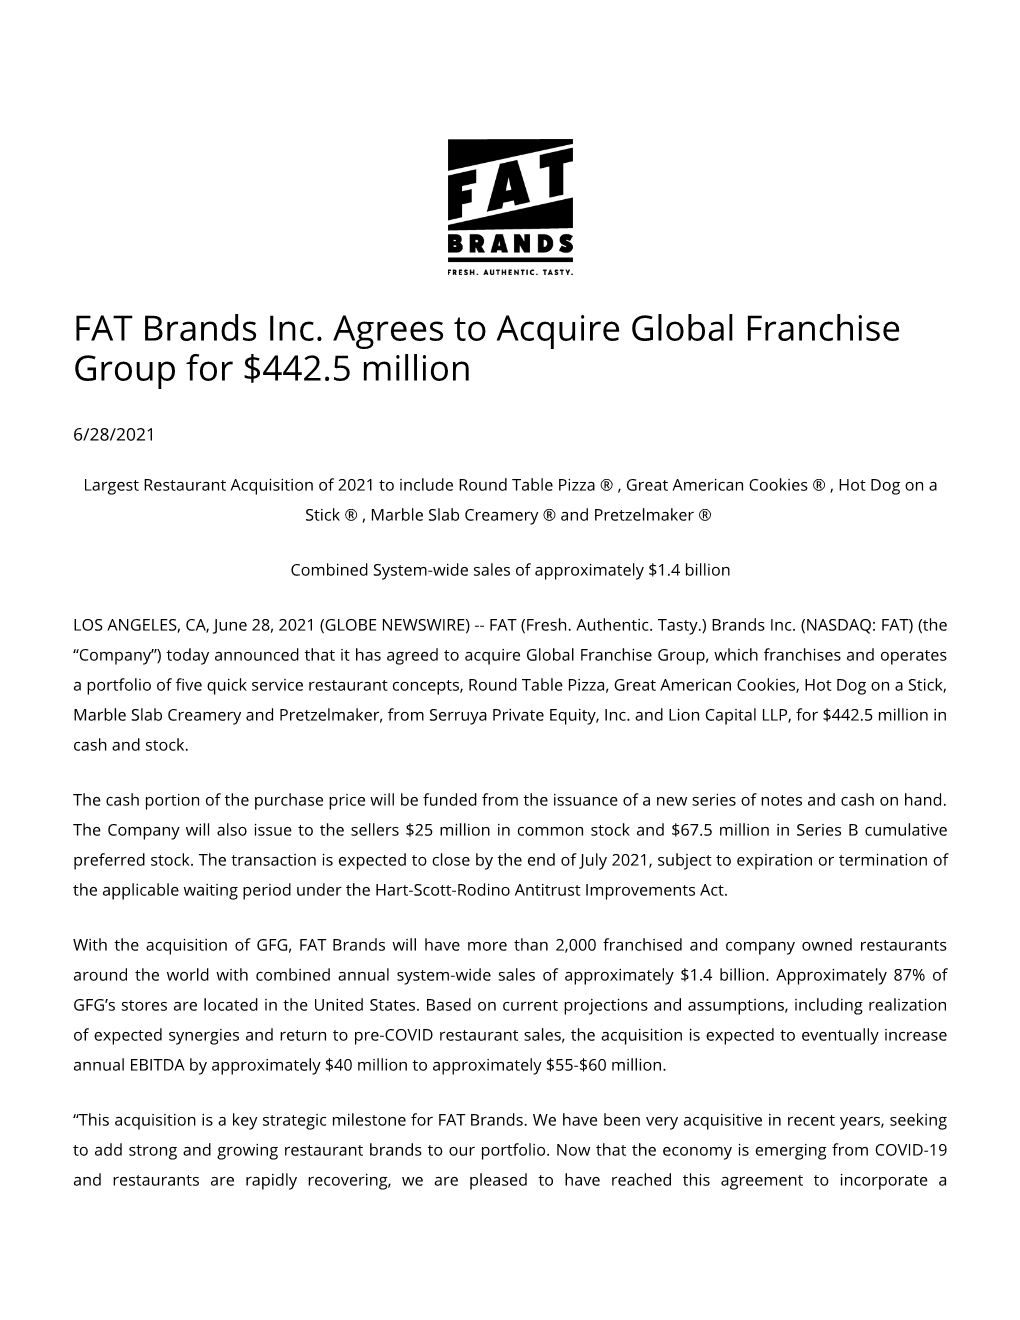 FAT Brands Inc. Agrees to Acquire Global Franchise Group for $442.5 Million